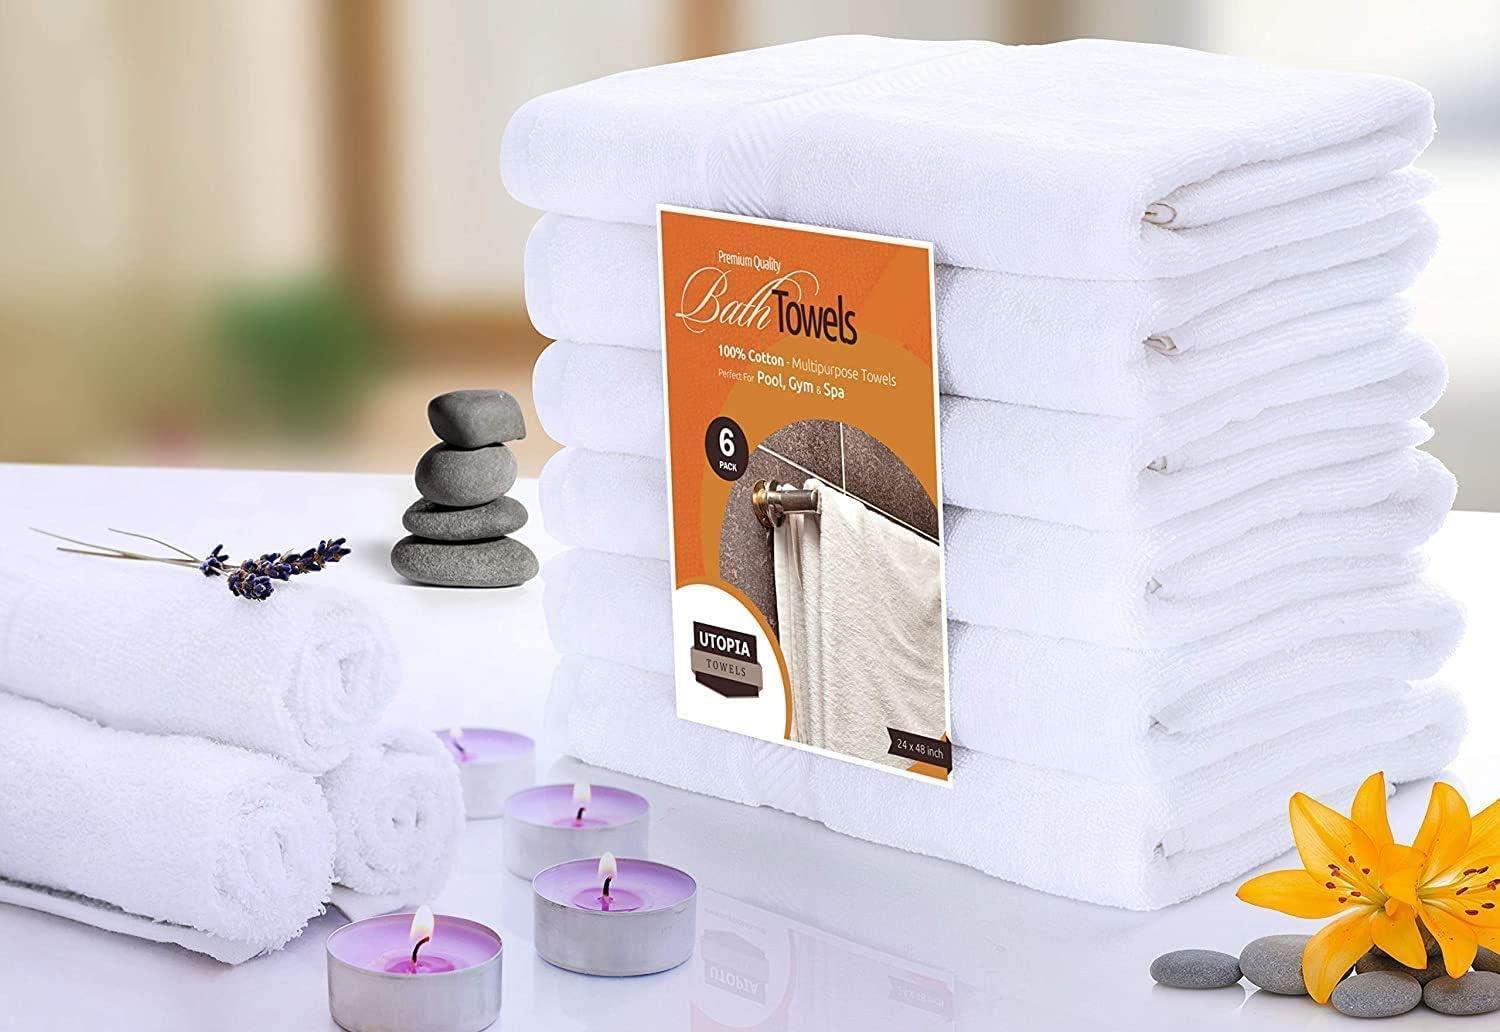 Utopia Towels - Hand Towel Set - Premium 100% Ring Spun Cotton - Quick Dry, Highly Absorbent, Soft Feel Towels, Perfect for Dail